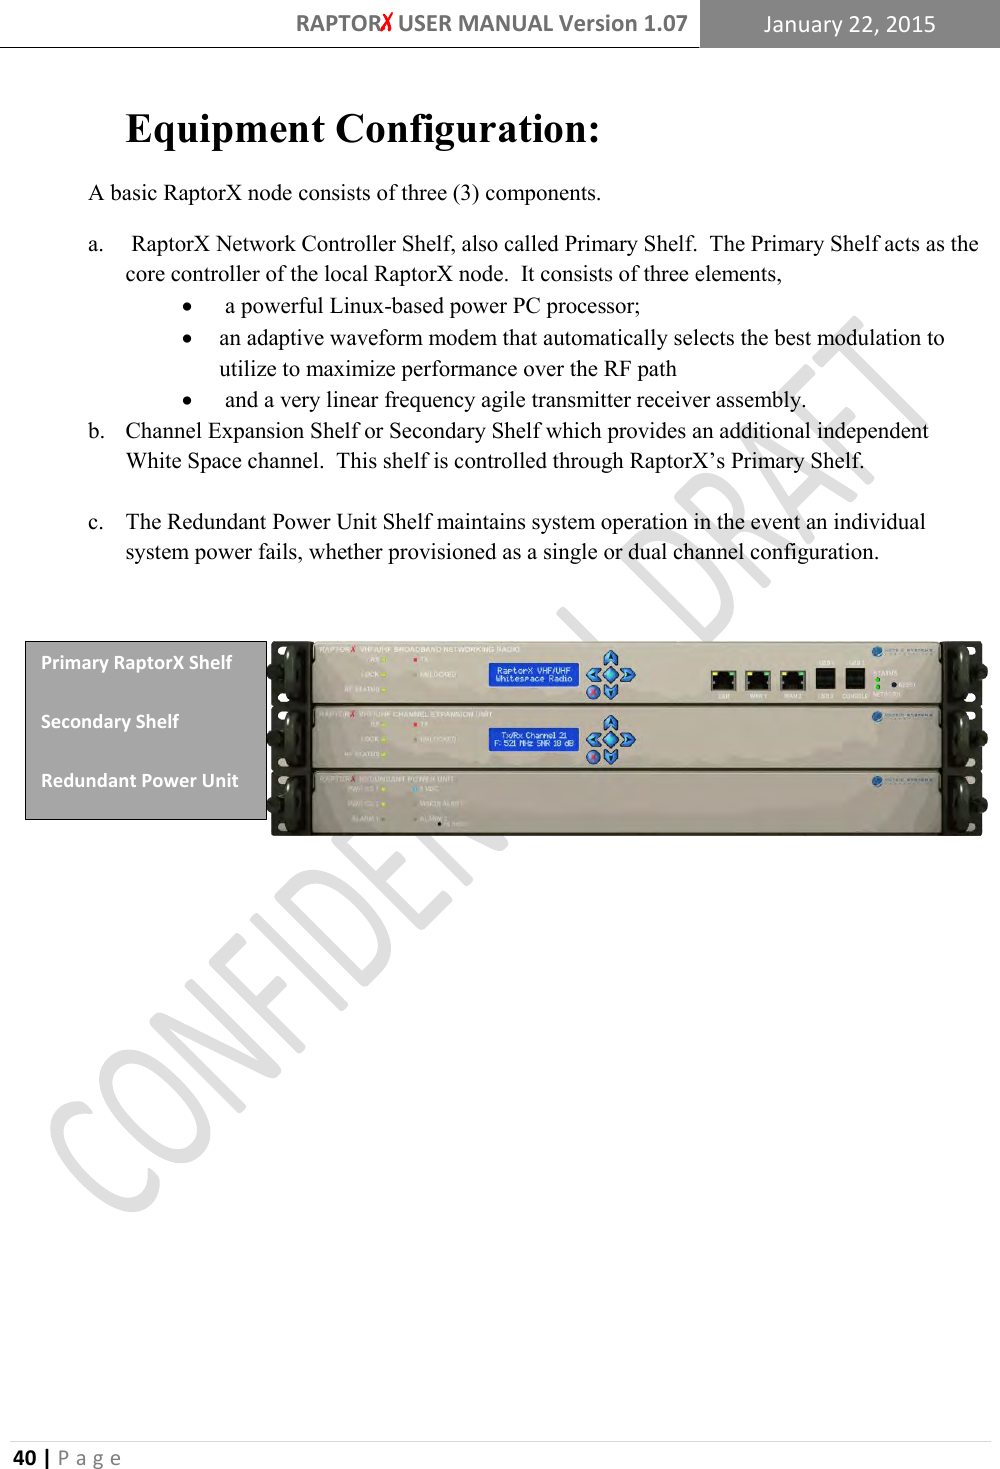 RAPTORX USER MANUAL Version 1.07 January 22, 2015  40 | P a g e   Equipment Configuration: A basic RaptorX node consists of three (3) components.  a.  RaptorX Network Controller Shelf, also called Primary Shelf.  The Primary Shelf acts as the core controller of the local RaptorX node.  It consists of three elements,   a powerful Linux-based power PC processor;   an adaptive waveform modem that automatically selects the best modulation to utilize to maximize performance over the RF path   and a very linear frequency agile transmitter receiver assembly. b. Channel Expansion Shelf or Secondary Shelf which provides an additional independent White Space channel.  This shelf is controlled through RaptorX’s Primary Shelf.    c. The Redundant Power Unit Shelf maintains system operation in the event an individual system power fails, whether provisioned as a single or dual channel configuration.           Primary RaptorX Shelf Secondary Shelf Redundant Power Unit 